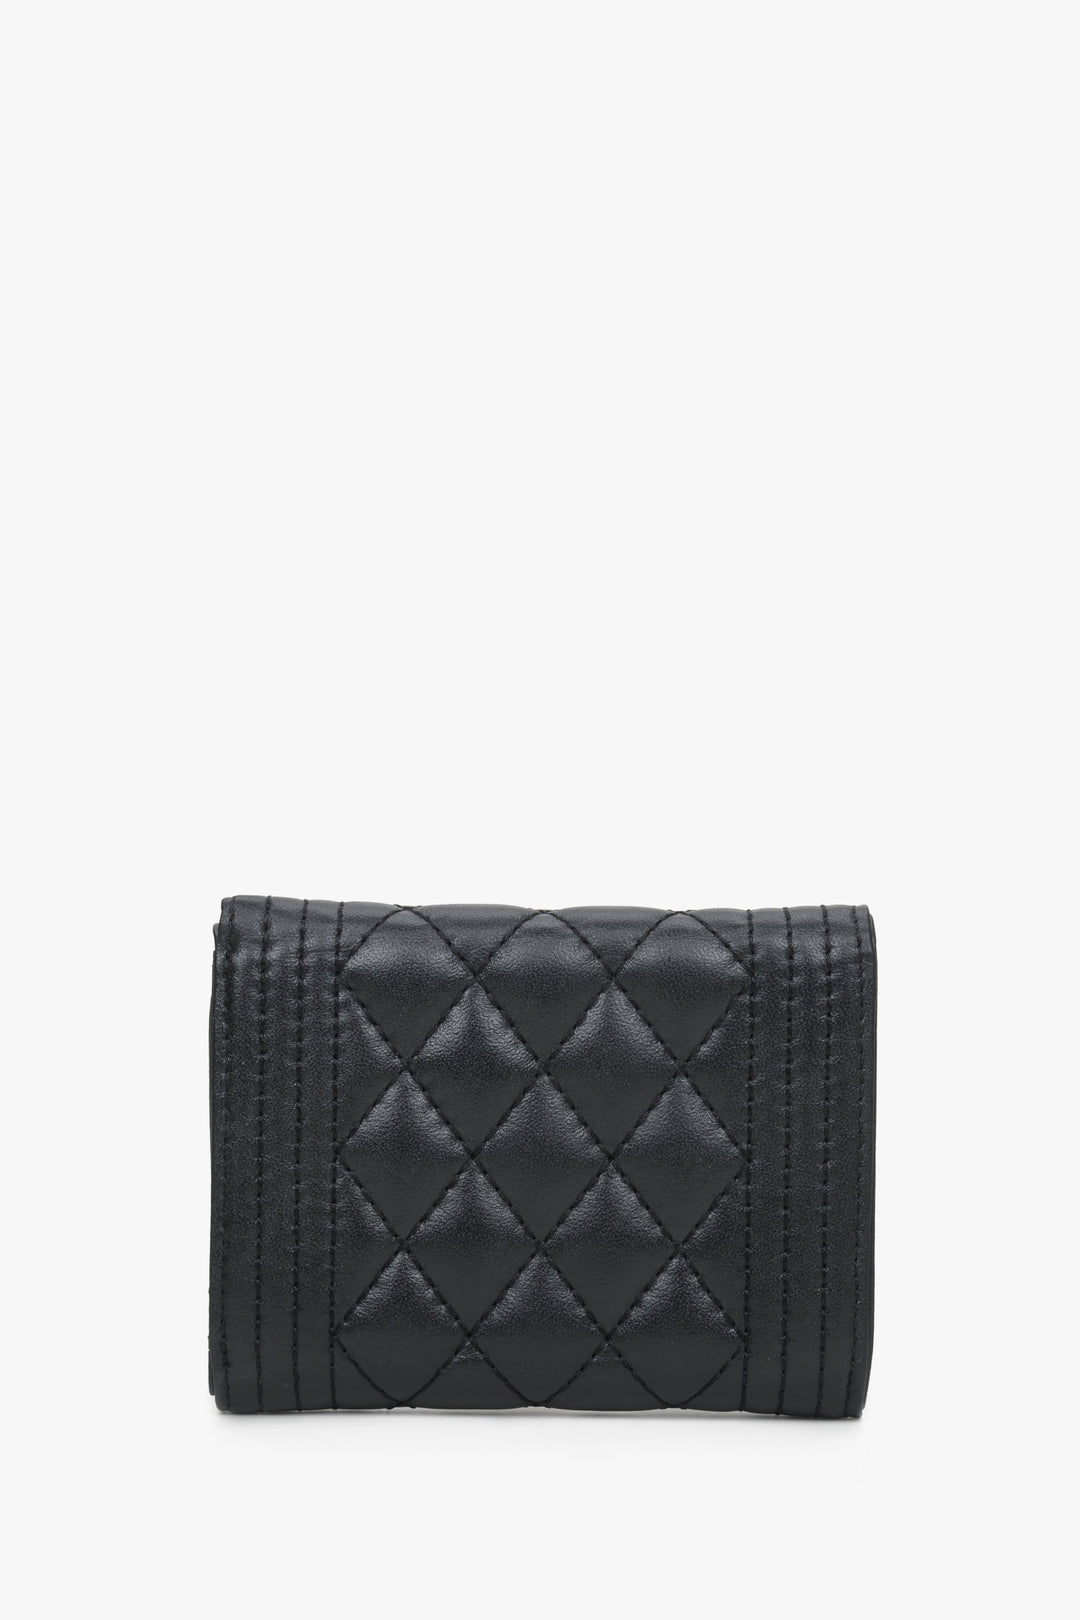 Women's small black wallet with embossing - back.